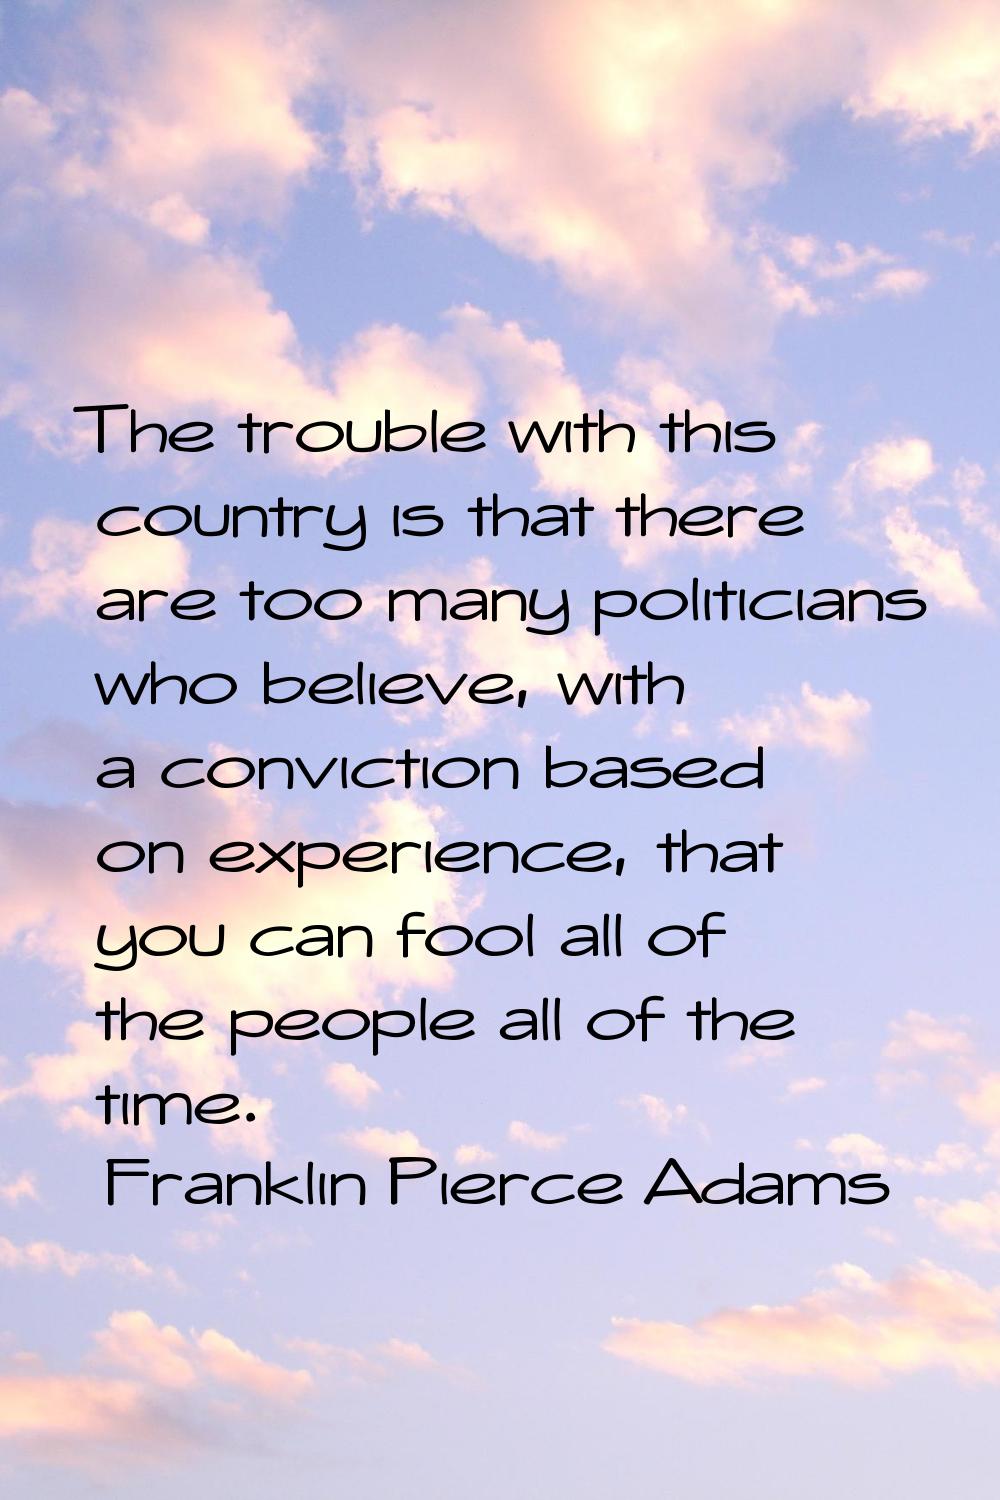 The trouble with this country is that there are too many politicians who believe, with a conviction